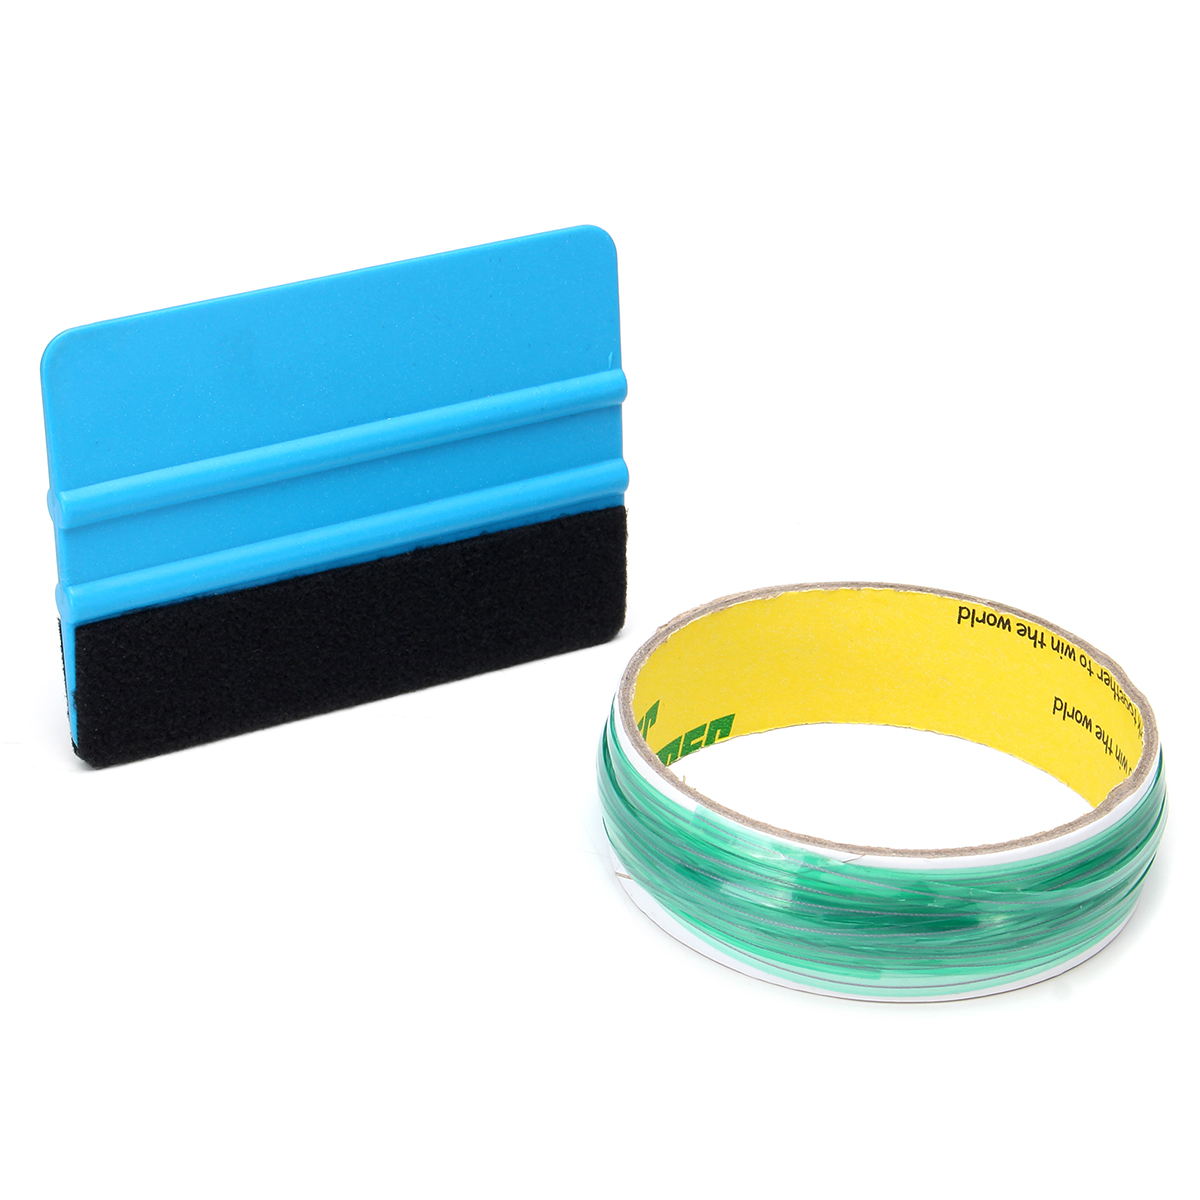 

10M Knifeless Cutting Tape Finishing Line Plus with Squeegee Tool for Vinyl Wrap